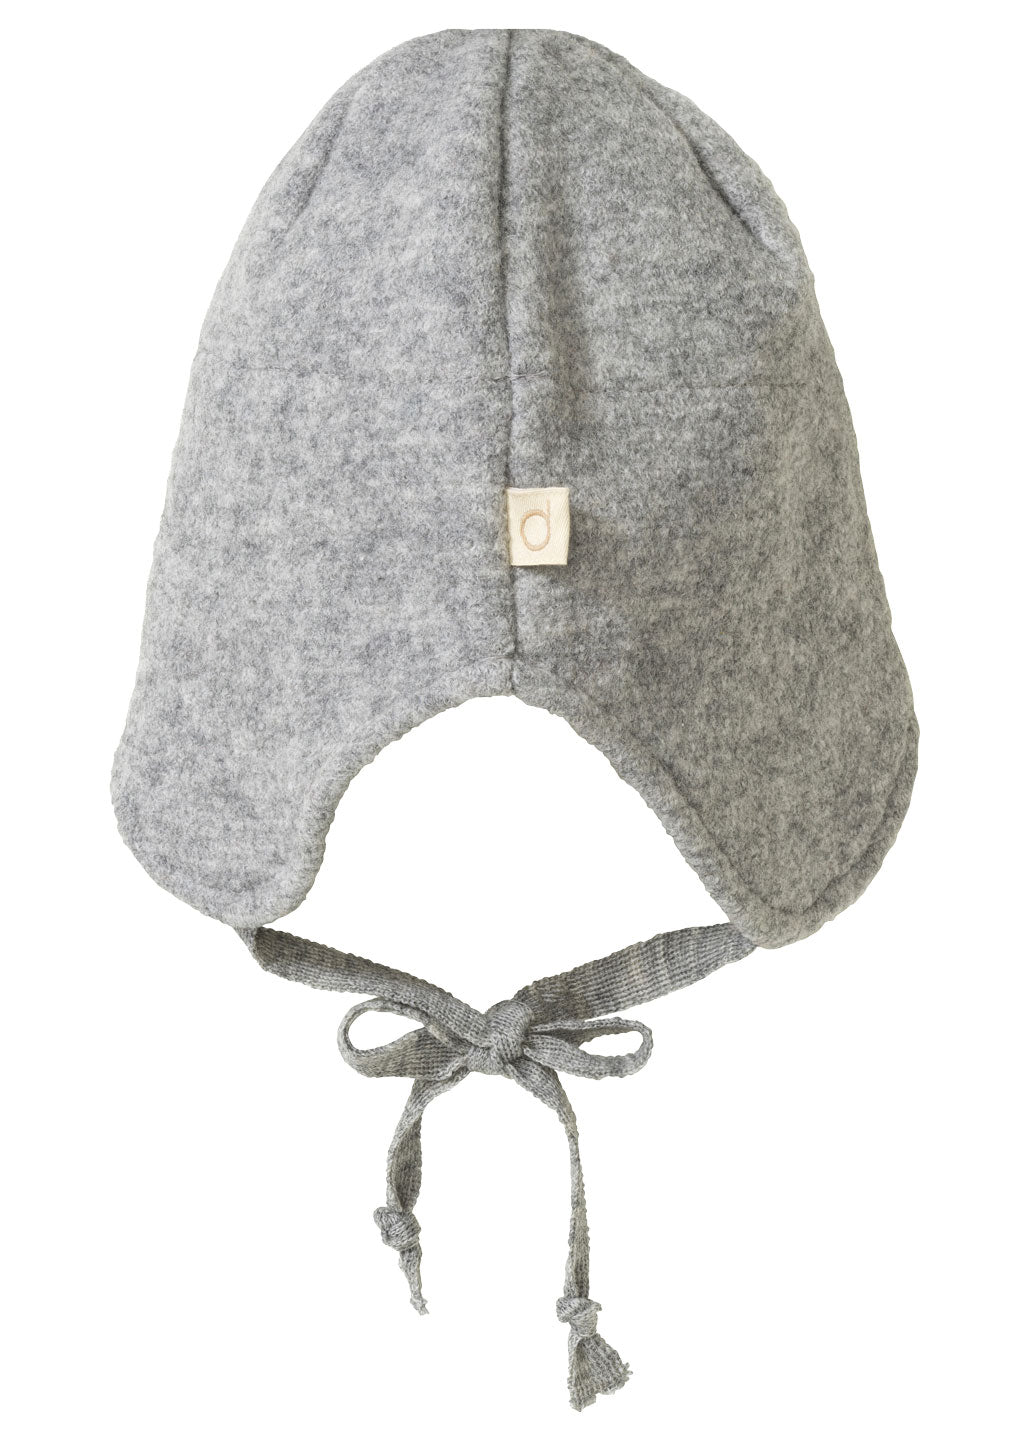 Back view of the Disana boiled wool hat in gray